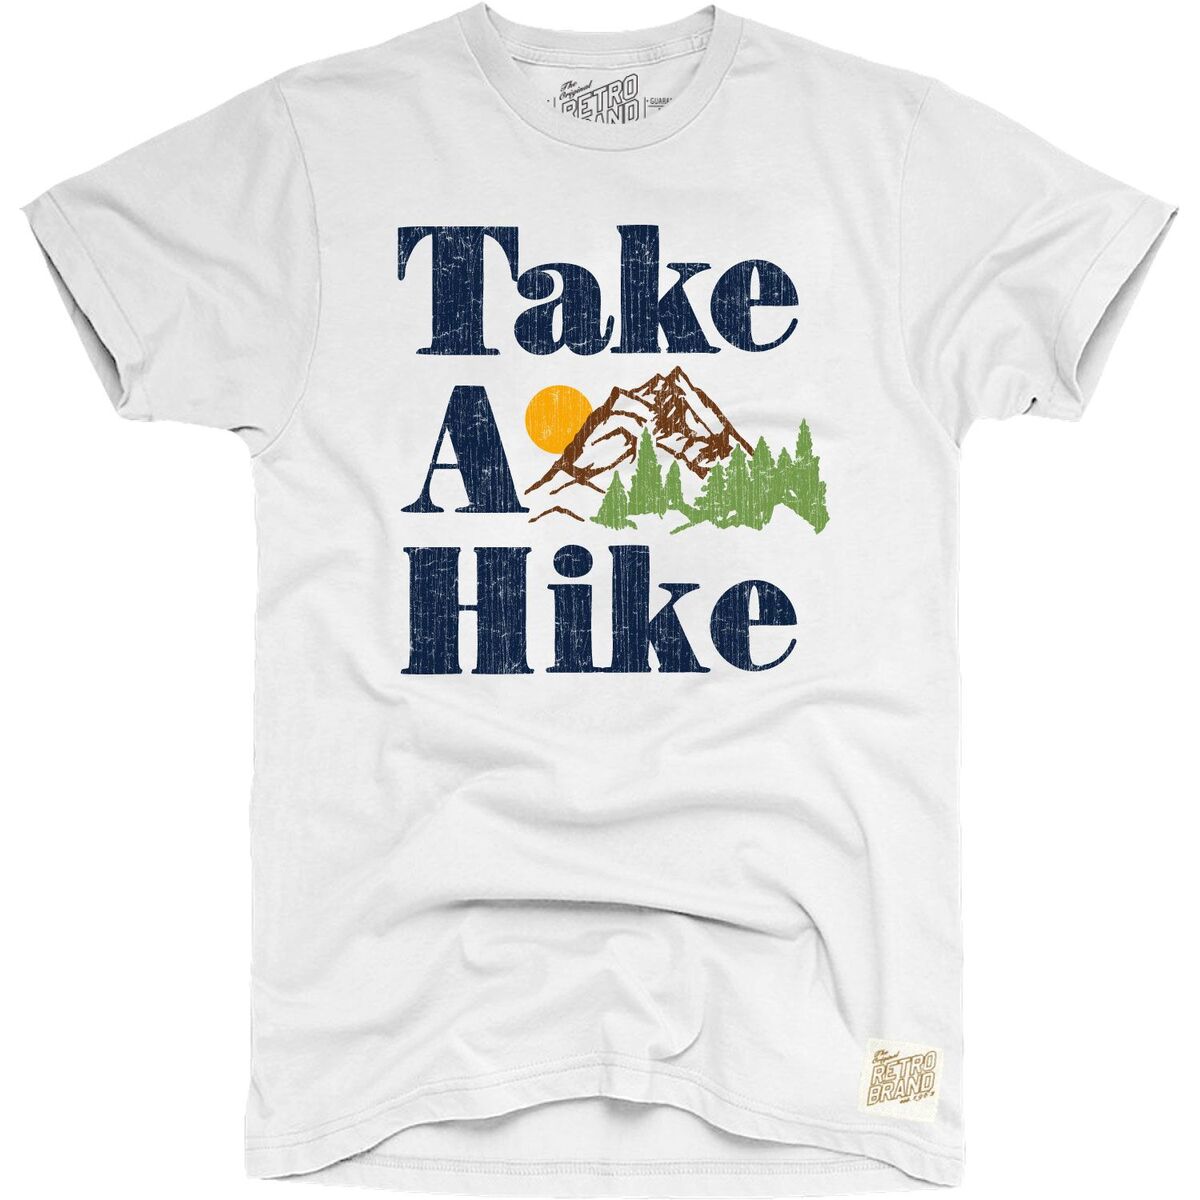 Take a Hike in blue with mountain trees and sun graphic on our 100% cotton unisex tee in white